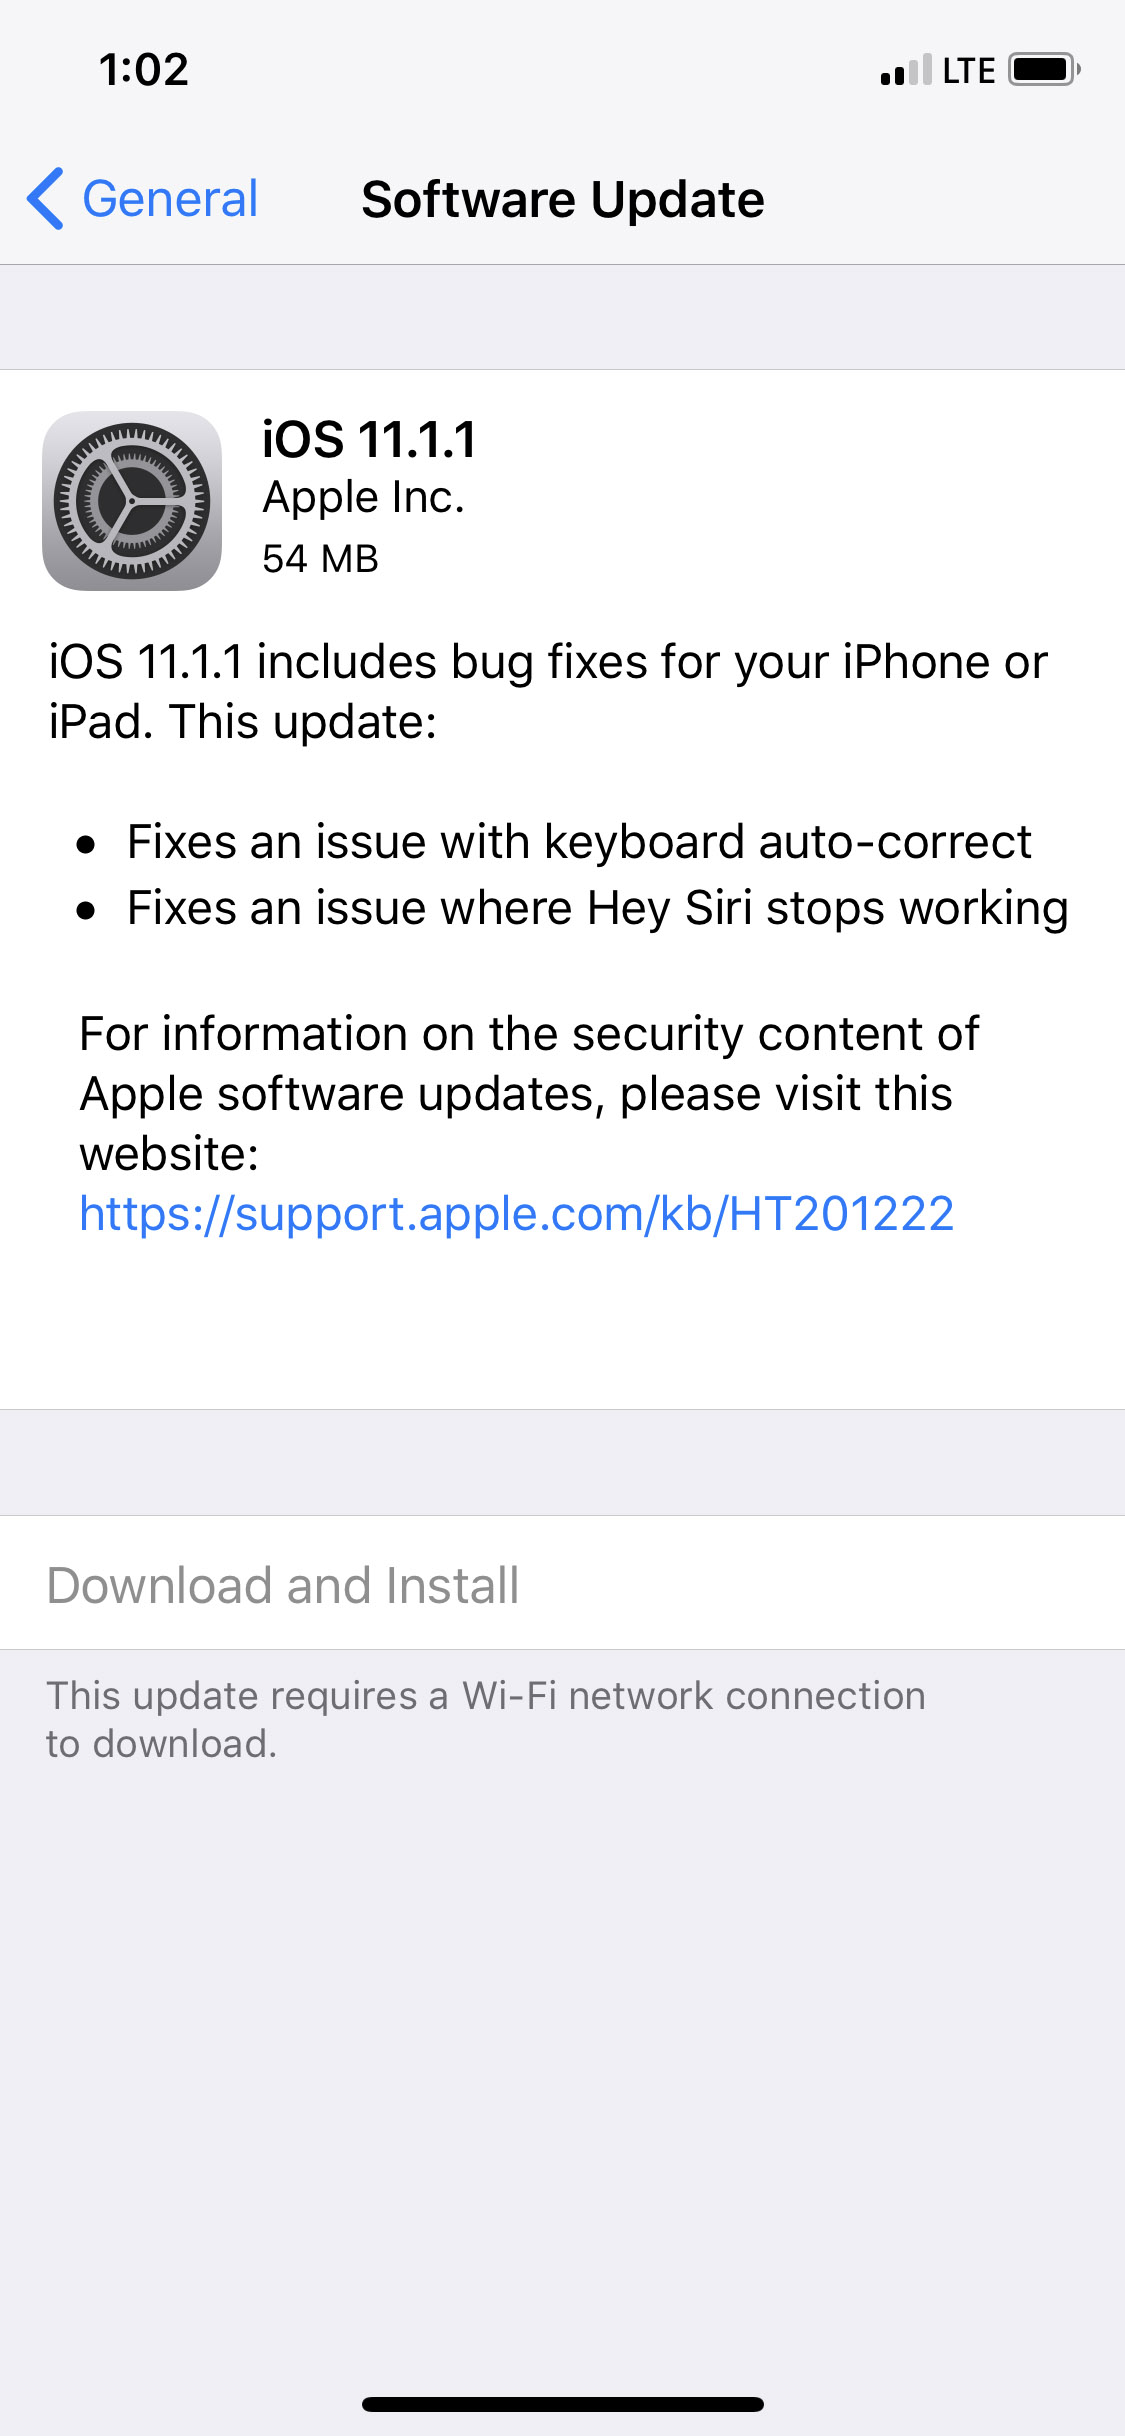 Apple Releases iOS 11.1.1 to Fix Issues With Auto-Correct and Hey Siri [Download]